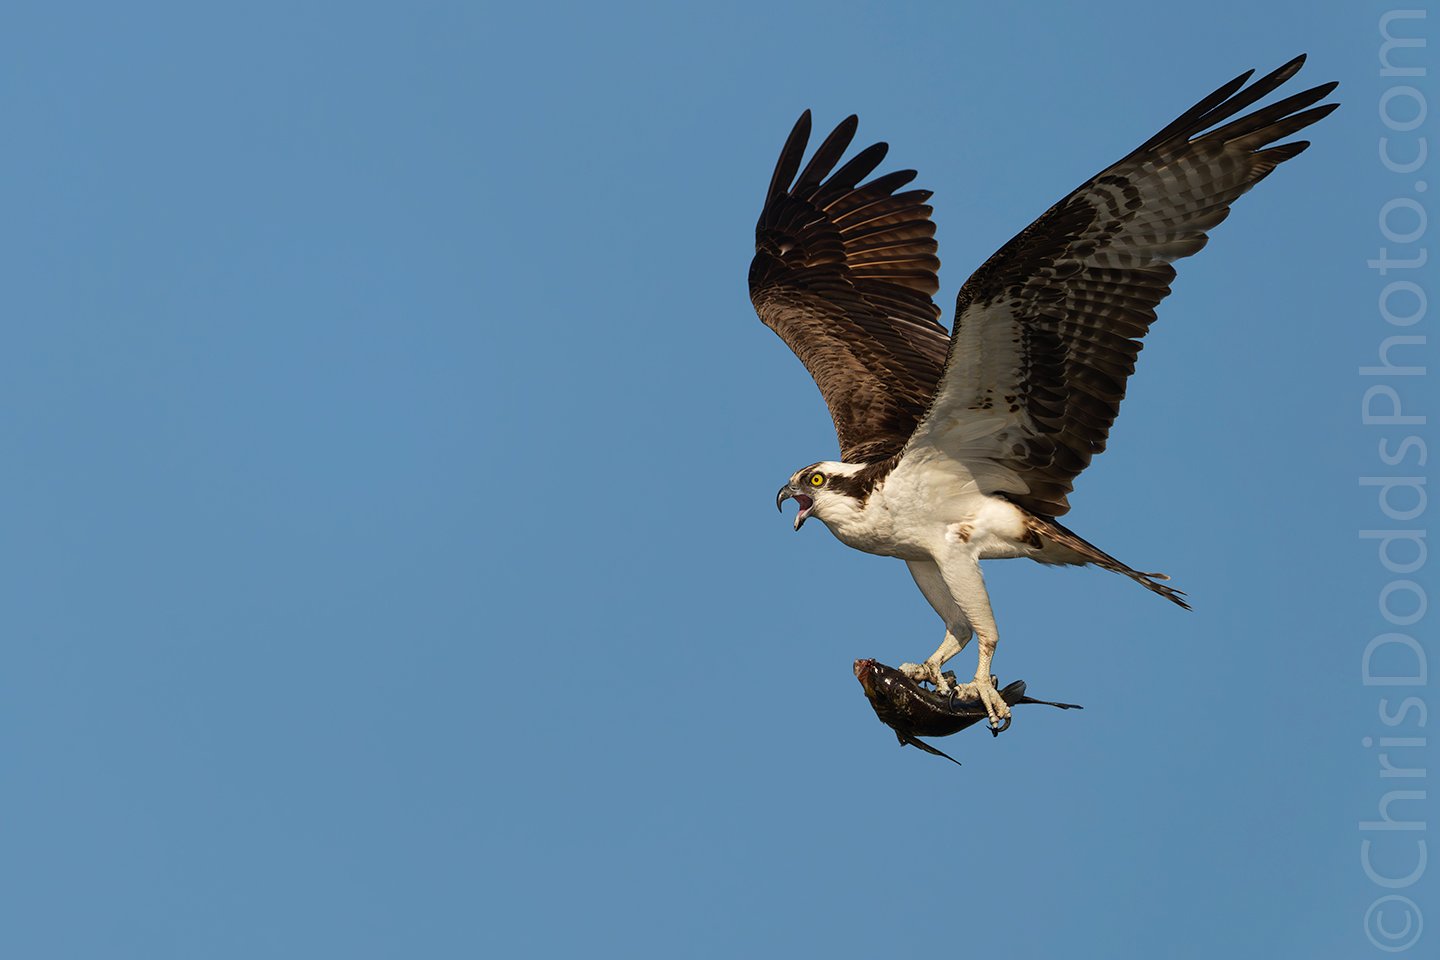 Osprey Showing off a Fish — Nature Photography Blog